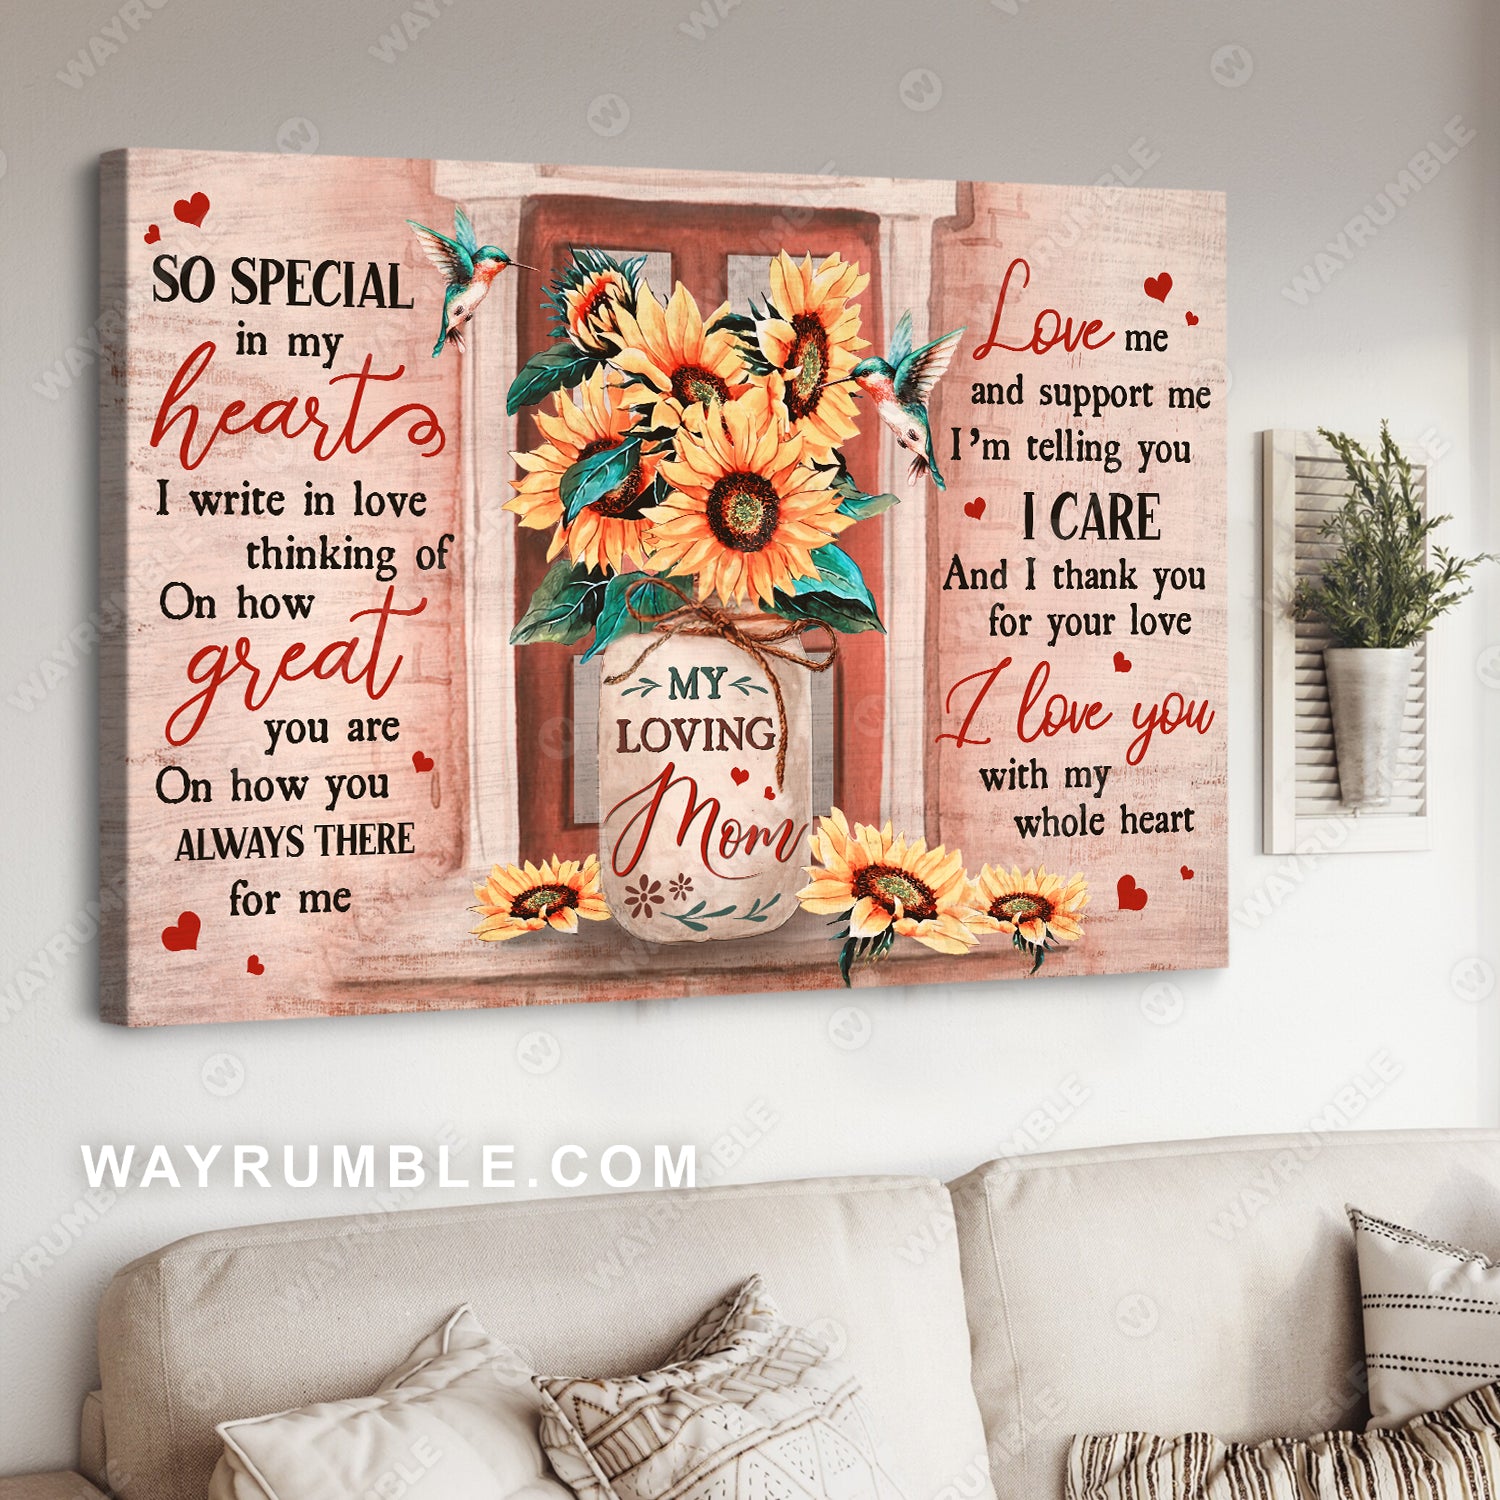 Daughter to mom, Sunflower vase, Pink background, I love you with my whole heart - Family Landscape Canvas Prints, Wall Art